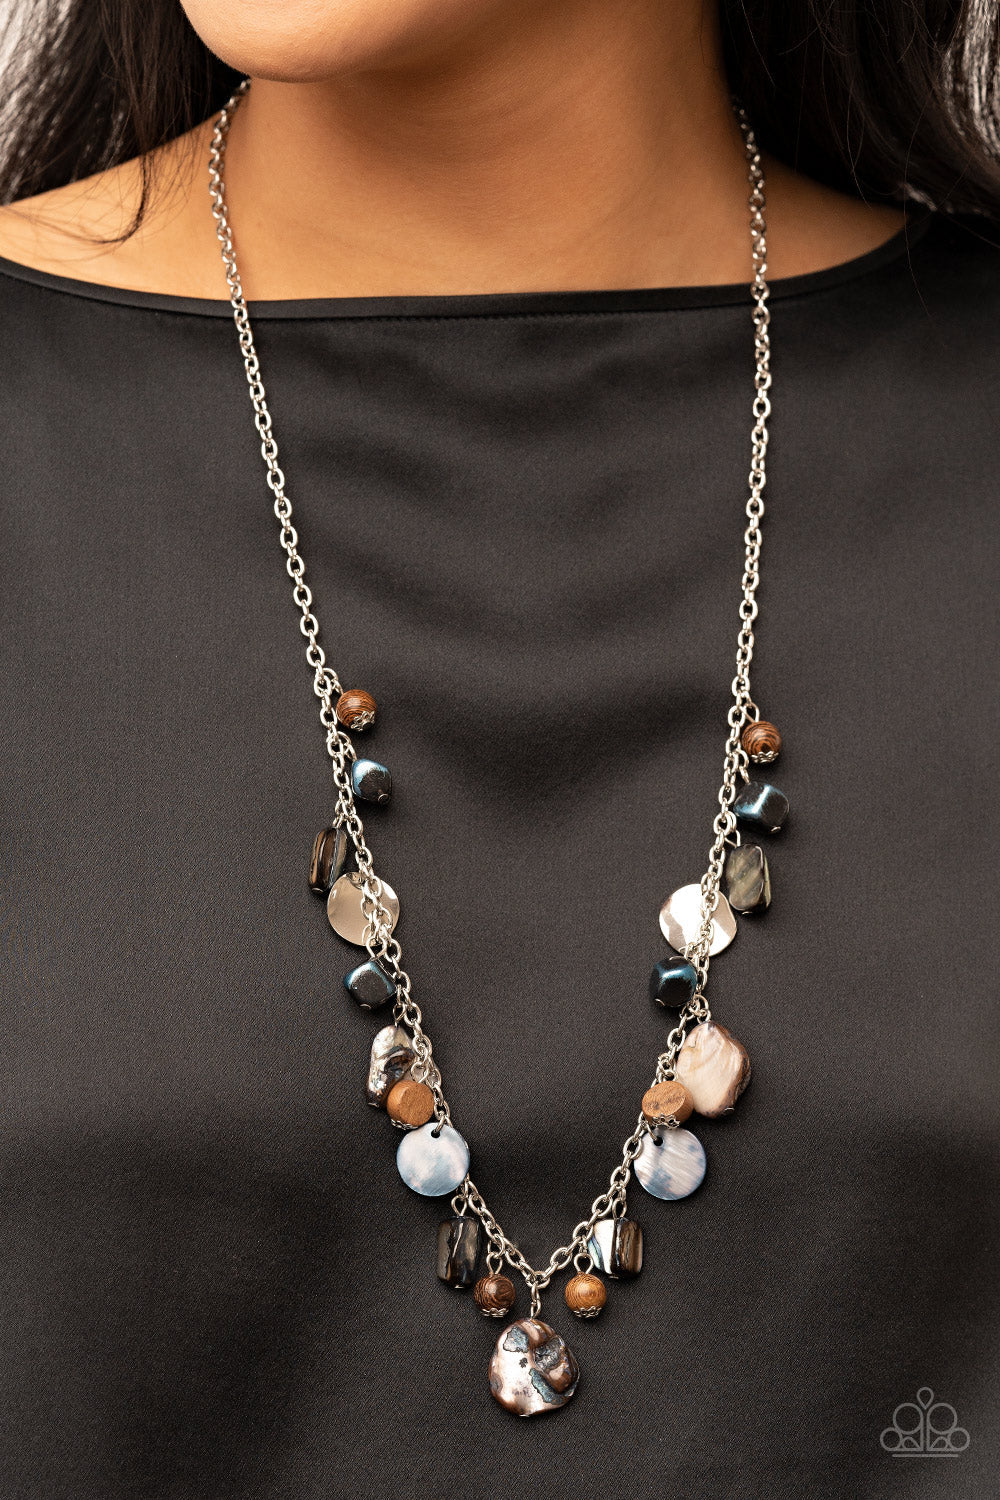 Caribbean Charisma - Blue and Silver Necklace - Paparazzi Jewelry - Bejeweled Accessories By Kristie - A mismatched collection of warped silver discs, brown wooden beads, and iridescent shell-like rock accents dances from the bottom of a classic silver chain, creating a tropical sensation across the chest. Features an adjustable clasp closure. Sold as one individual necklace.